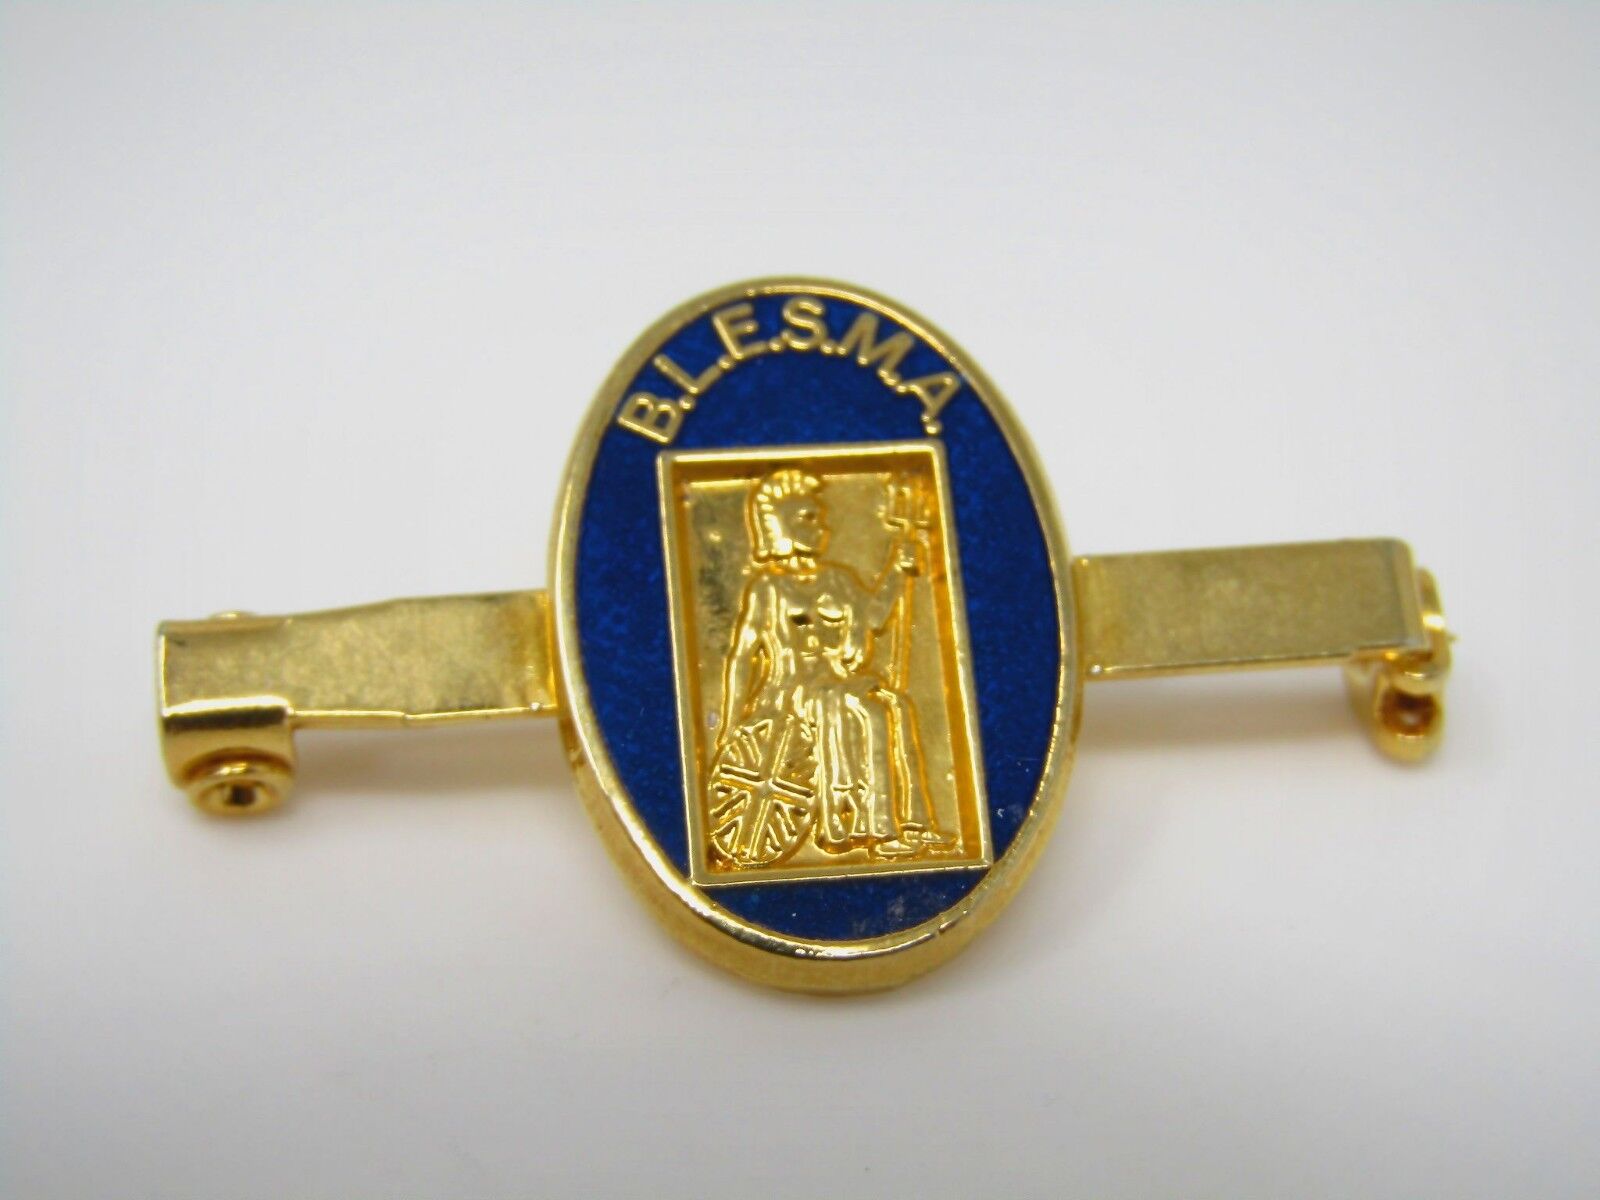 Vintage Collectible Pin: BLESMA B.L.E.S.M.A. Military Charity 